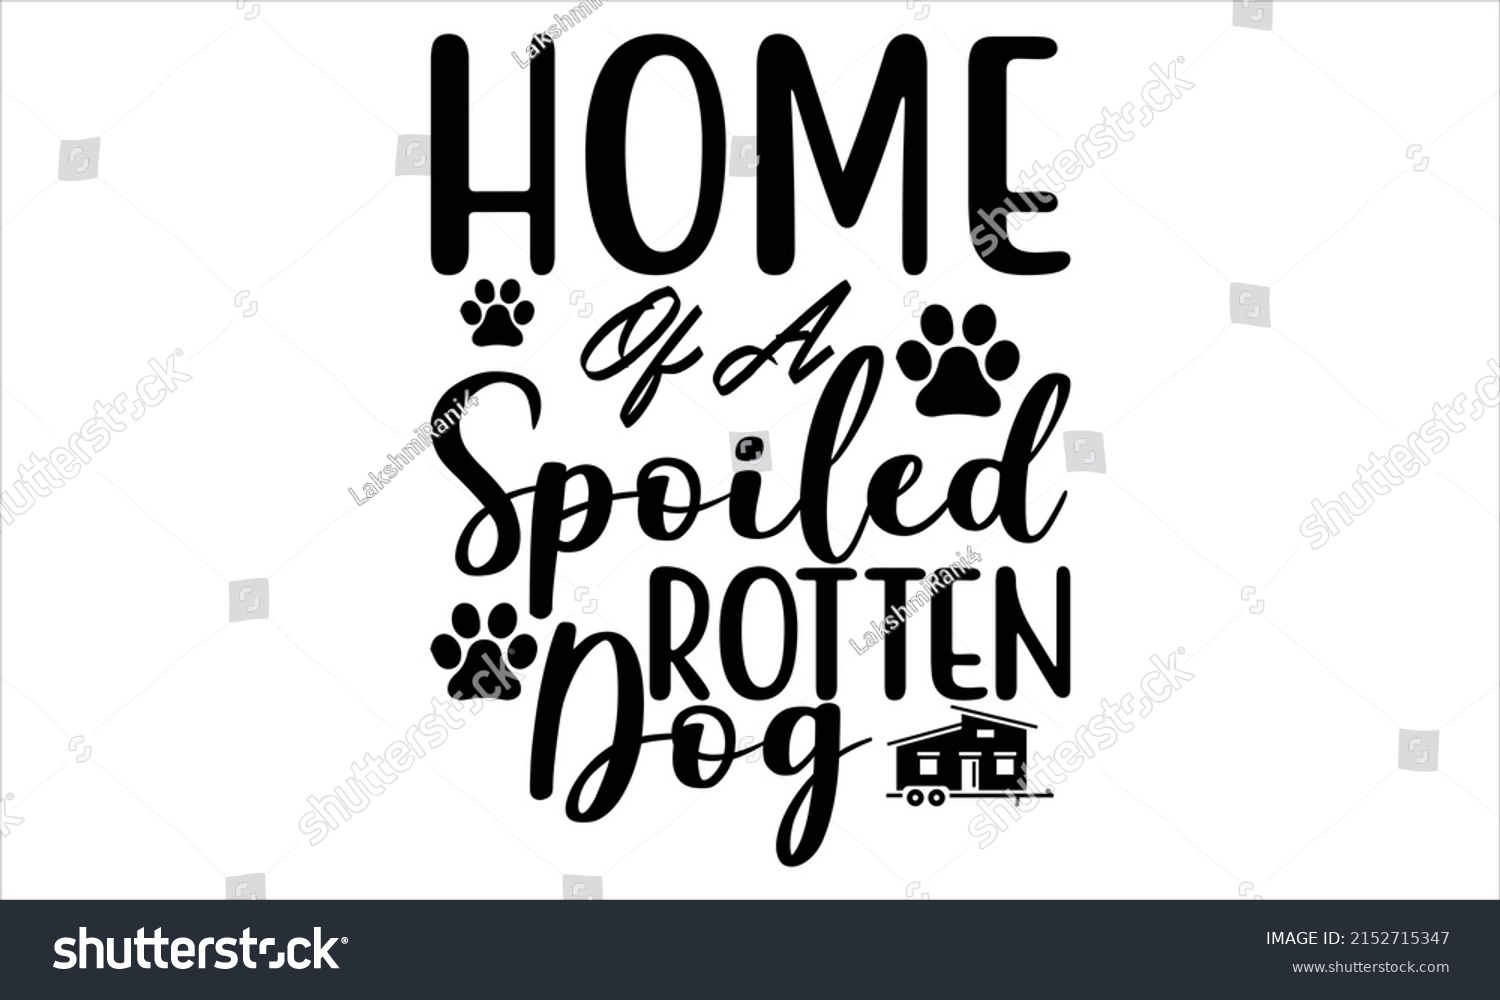 SVG of Home of a spoiled rotten dog  -   Lettering design for greeting banners, Mouse Pads, Prints, Cards and Posters, Mugs, Notebooks, Floor Pillows and T-shirt prints design.
 svg